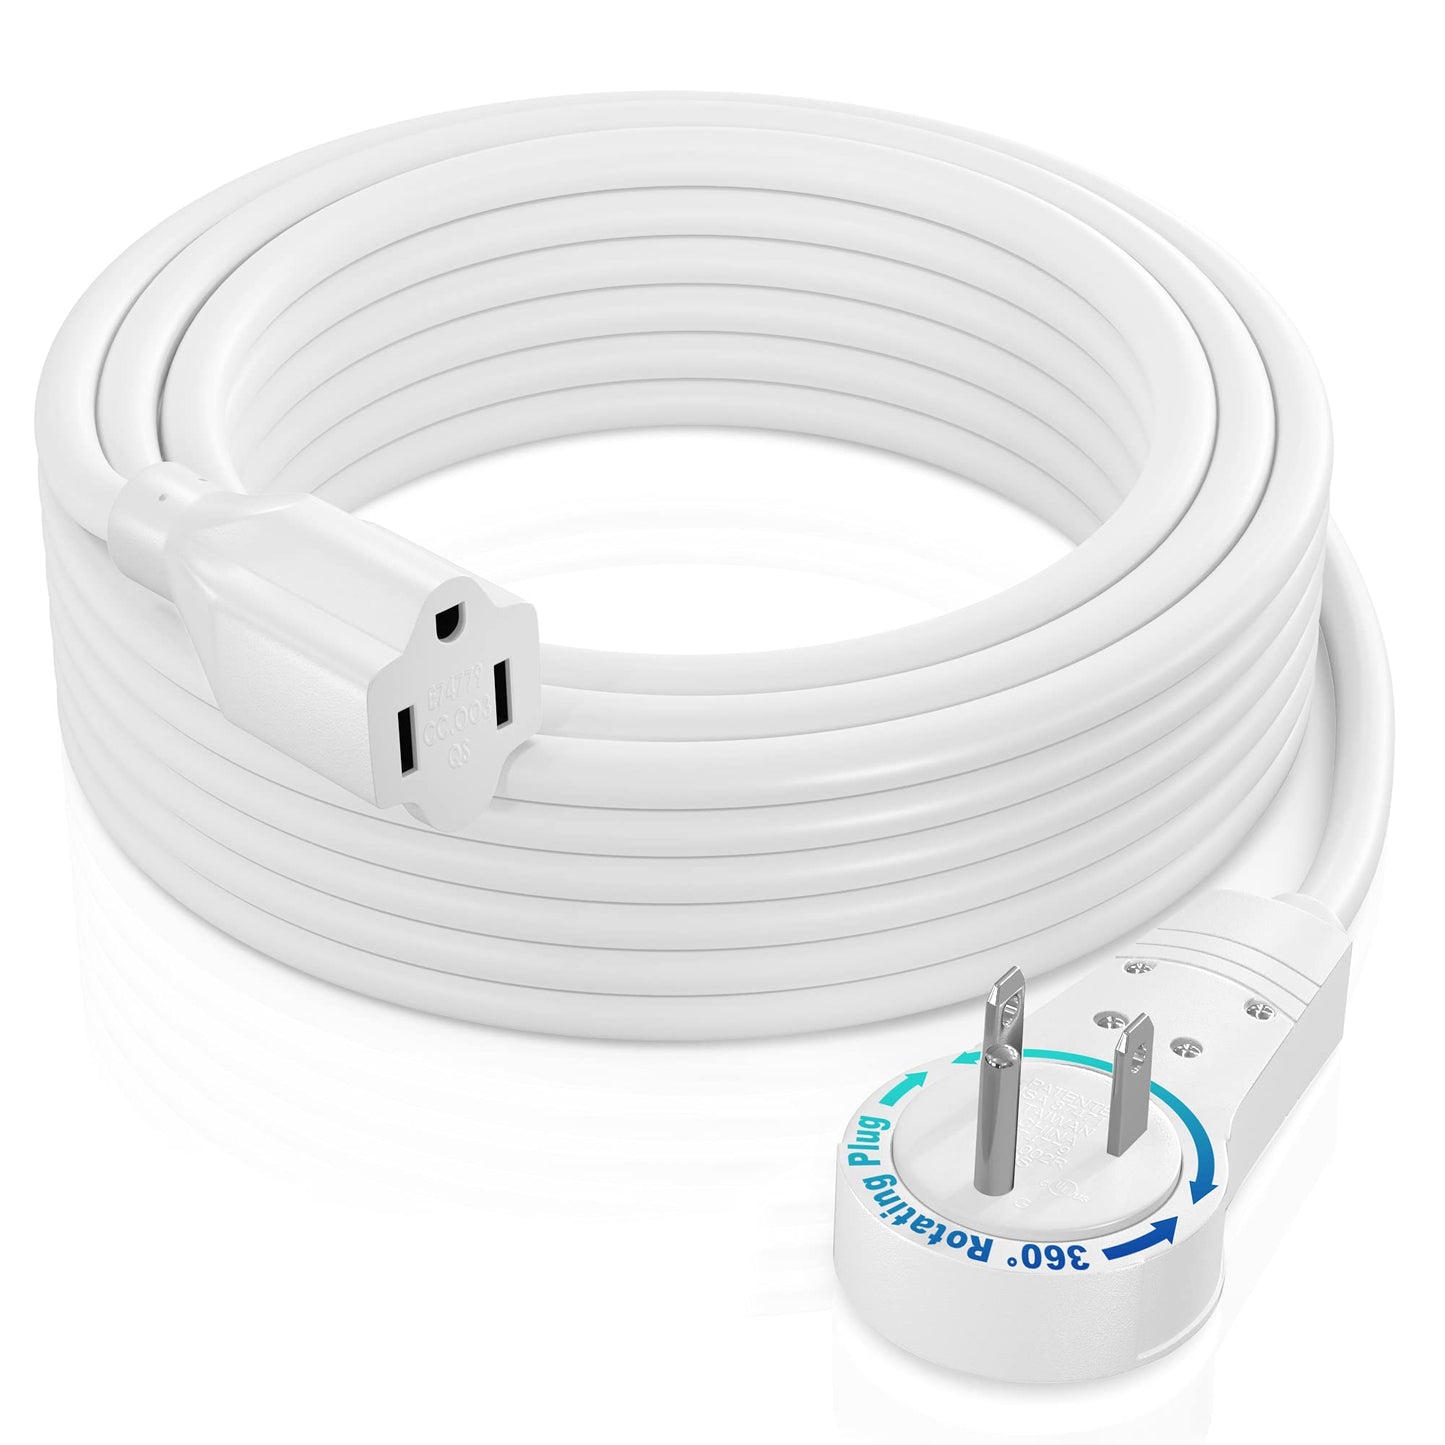 Maximm Extension Cord 25 Ft White Flat Plug, 360° Rotating Short Power Cord Single Outlet, Indoor 16 Gauge 3 Prong Grounded Wire UL Listed (25Ft White)